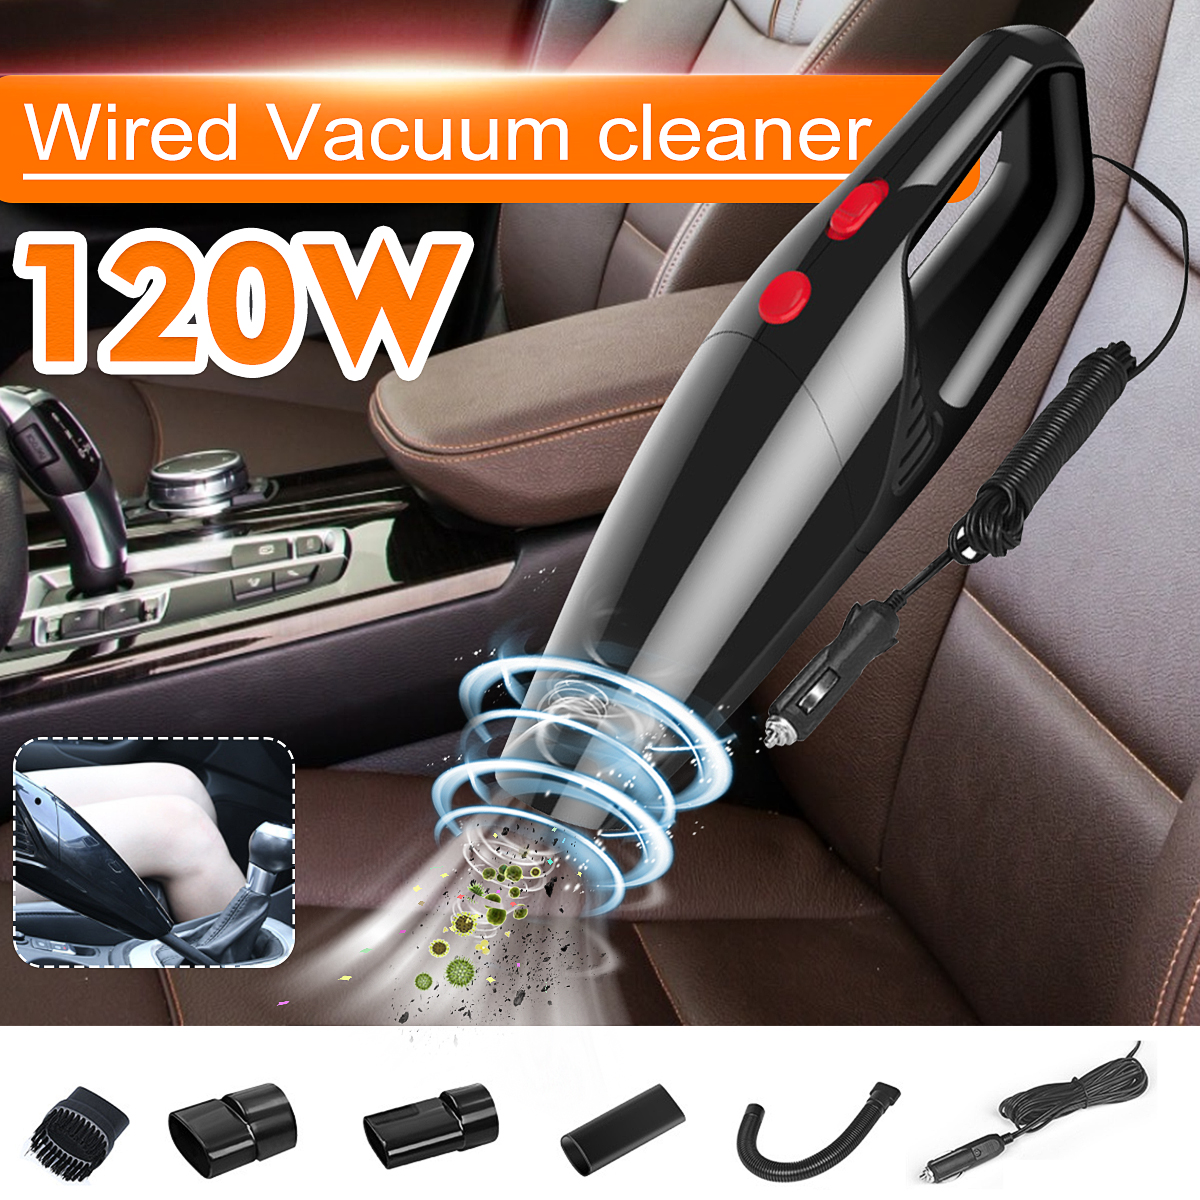 120W-4500kpa-Car-Wired-Vacuum-Cleaner-Handheld-Rechargeable-Mini-Home-Duster-1610857-1